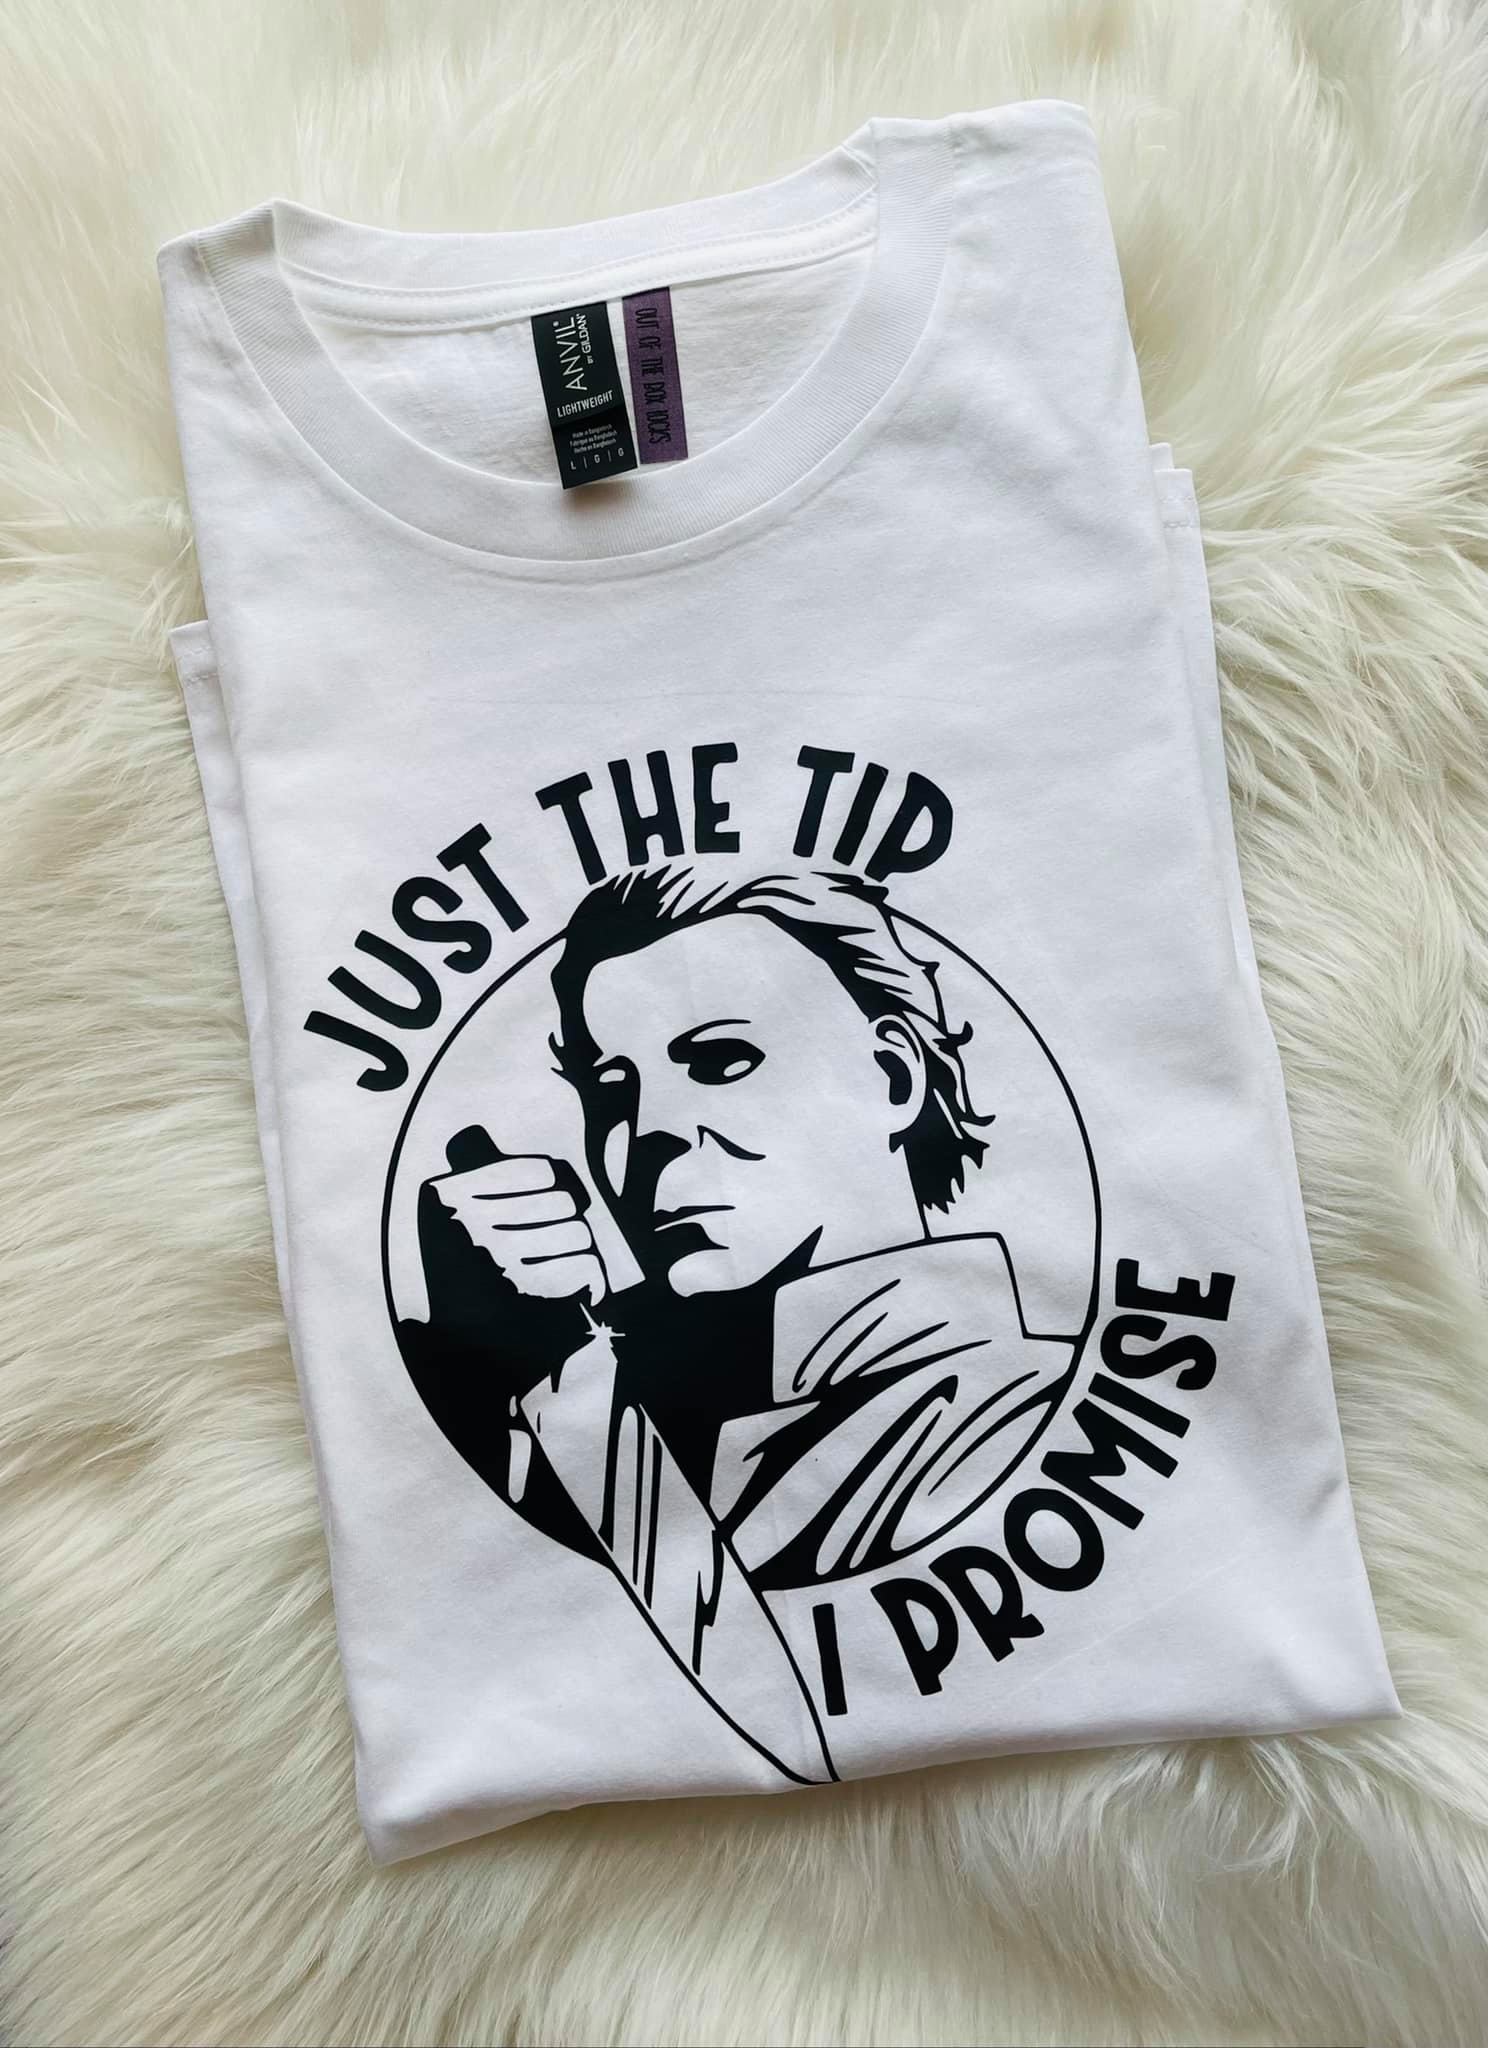 Just the Tip (TEE)